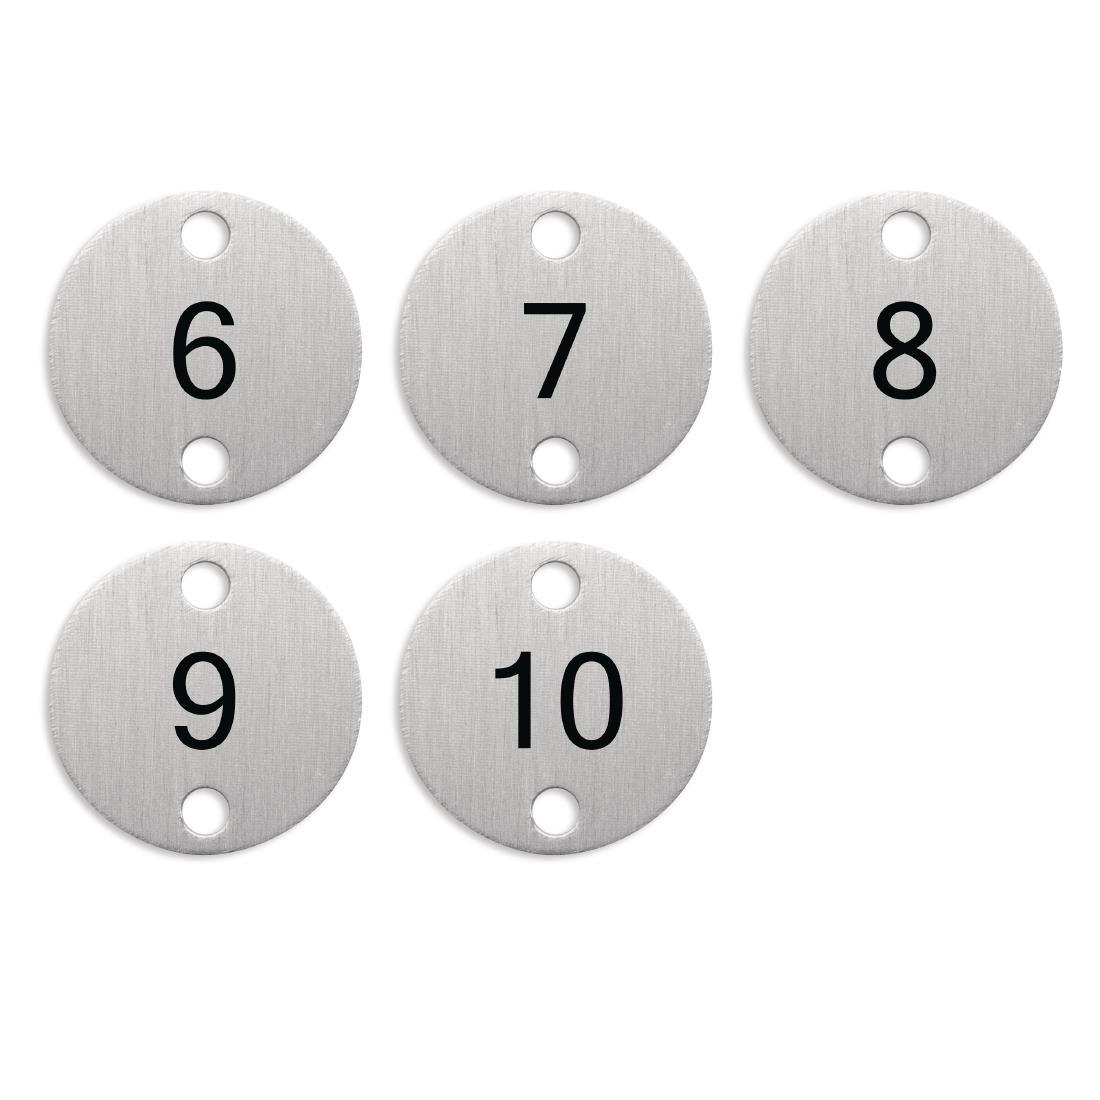 Bolero Table Numbers Silver (6-10) - DY771  - 2